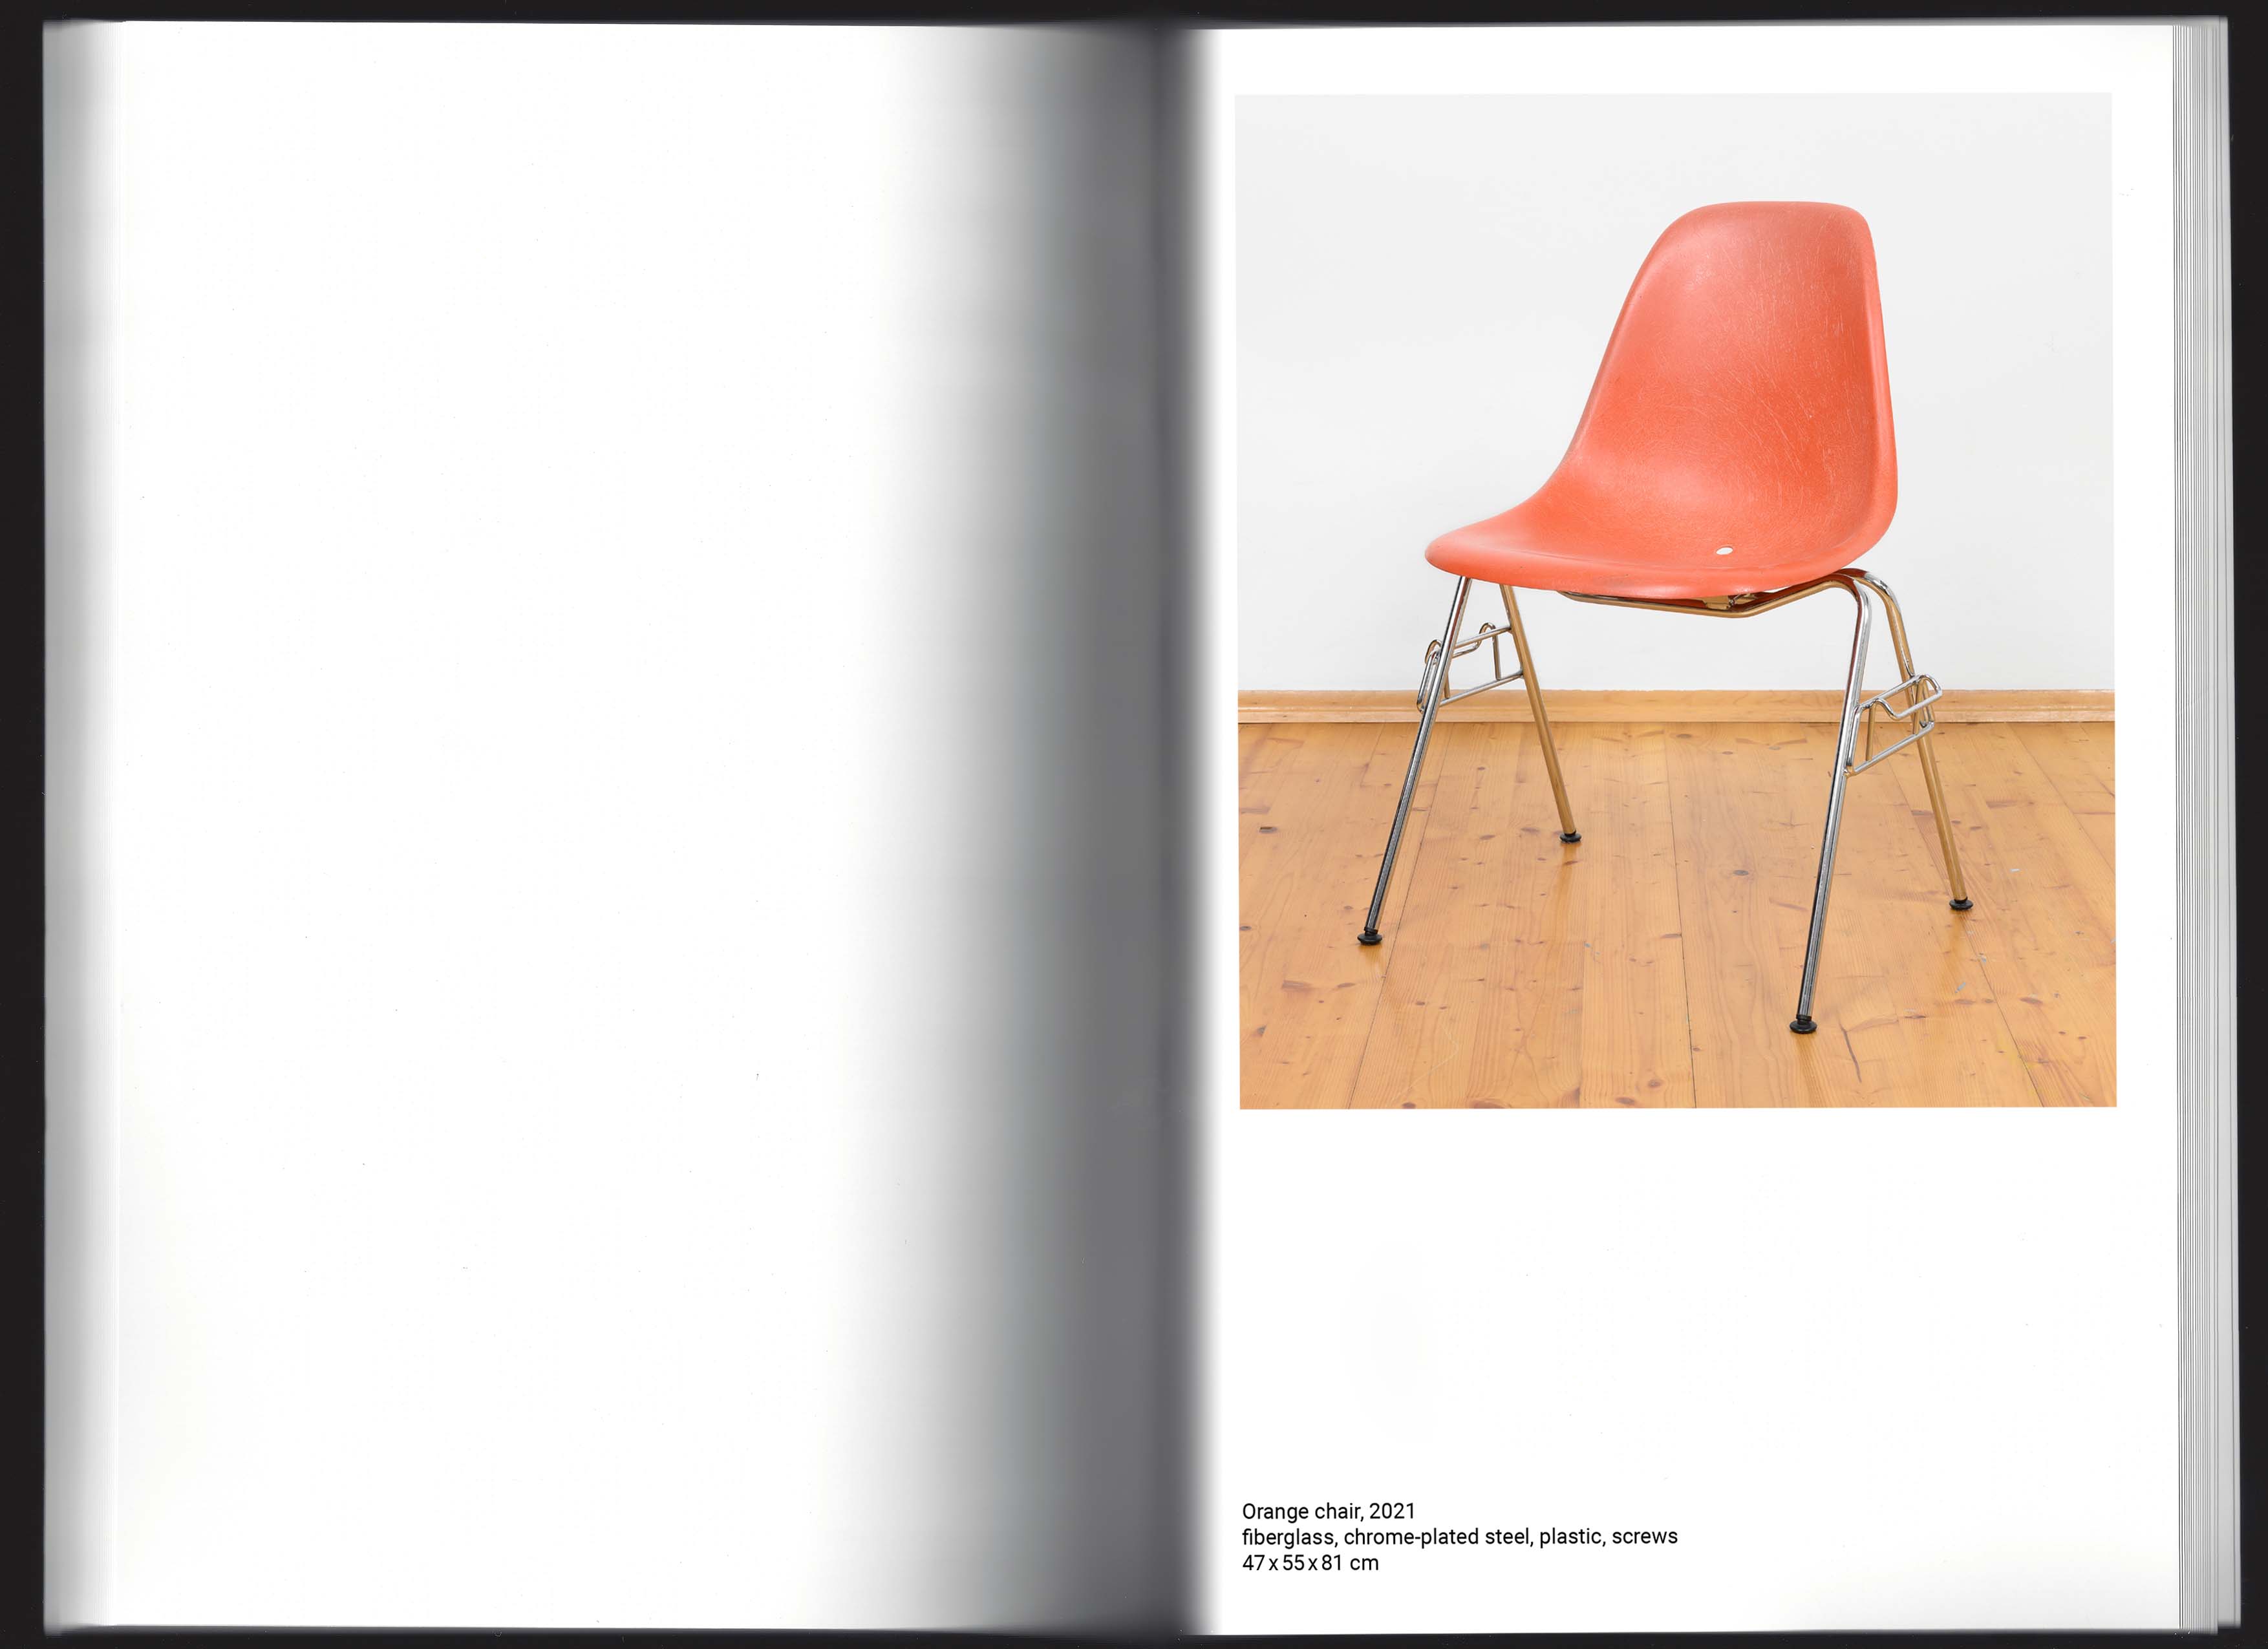 47 Objects, 2021, soft cover, glue binding, english, digitally printed, colour, 94 pages, 10 copies (+3 AP), 14,8 x 21 cm